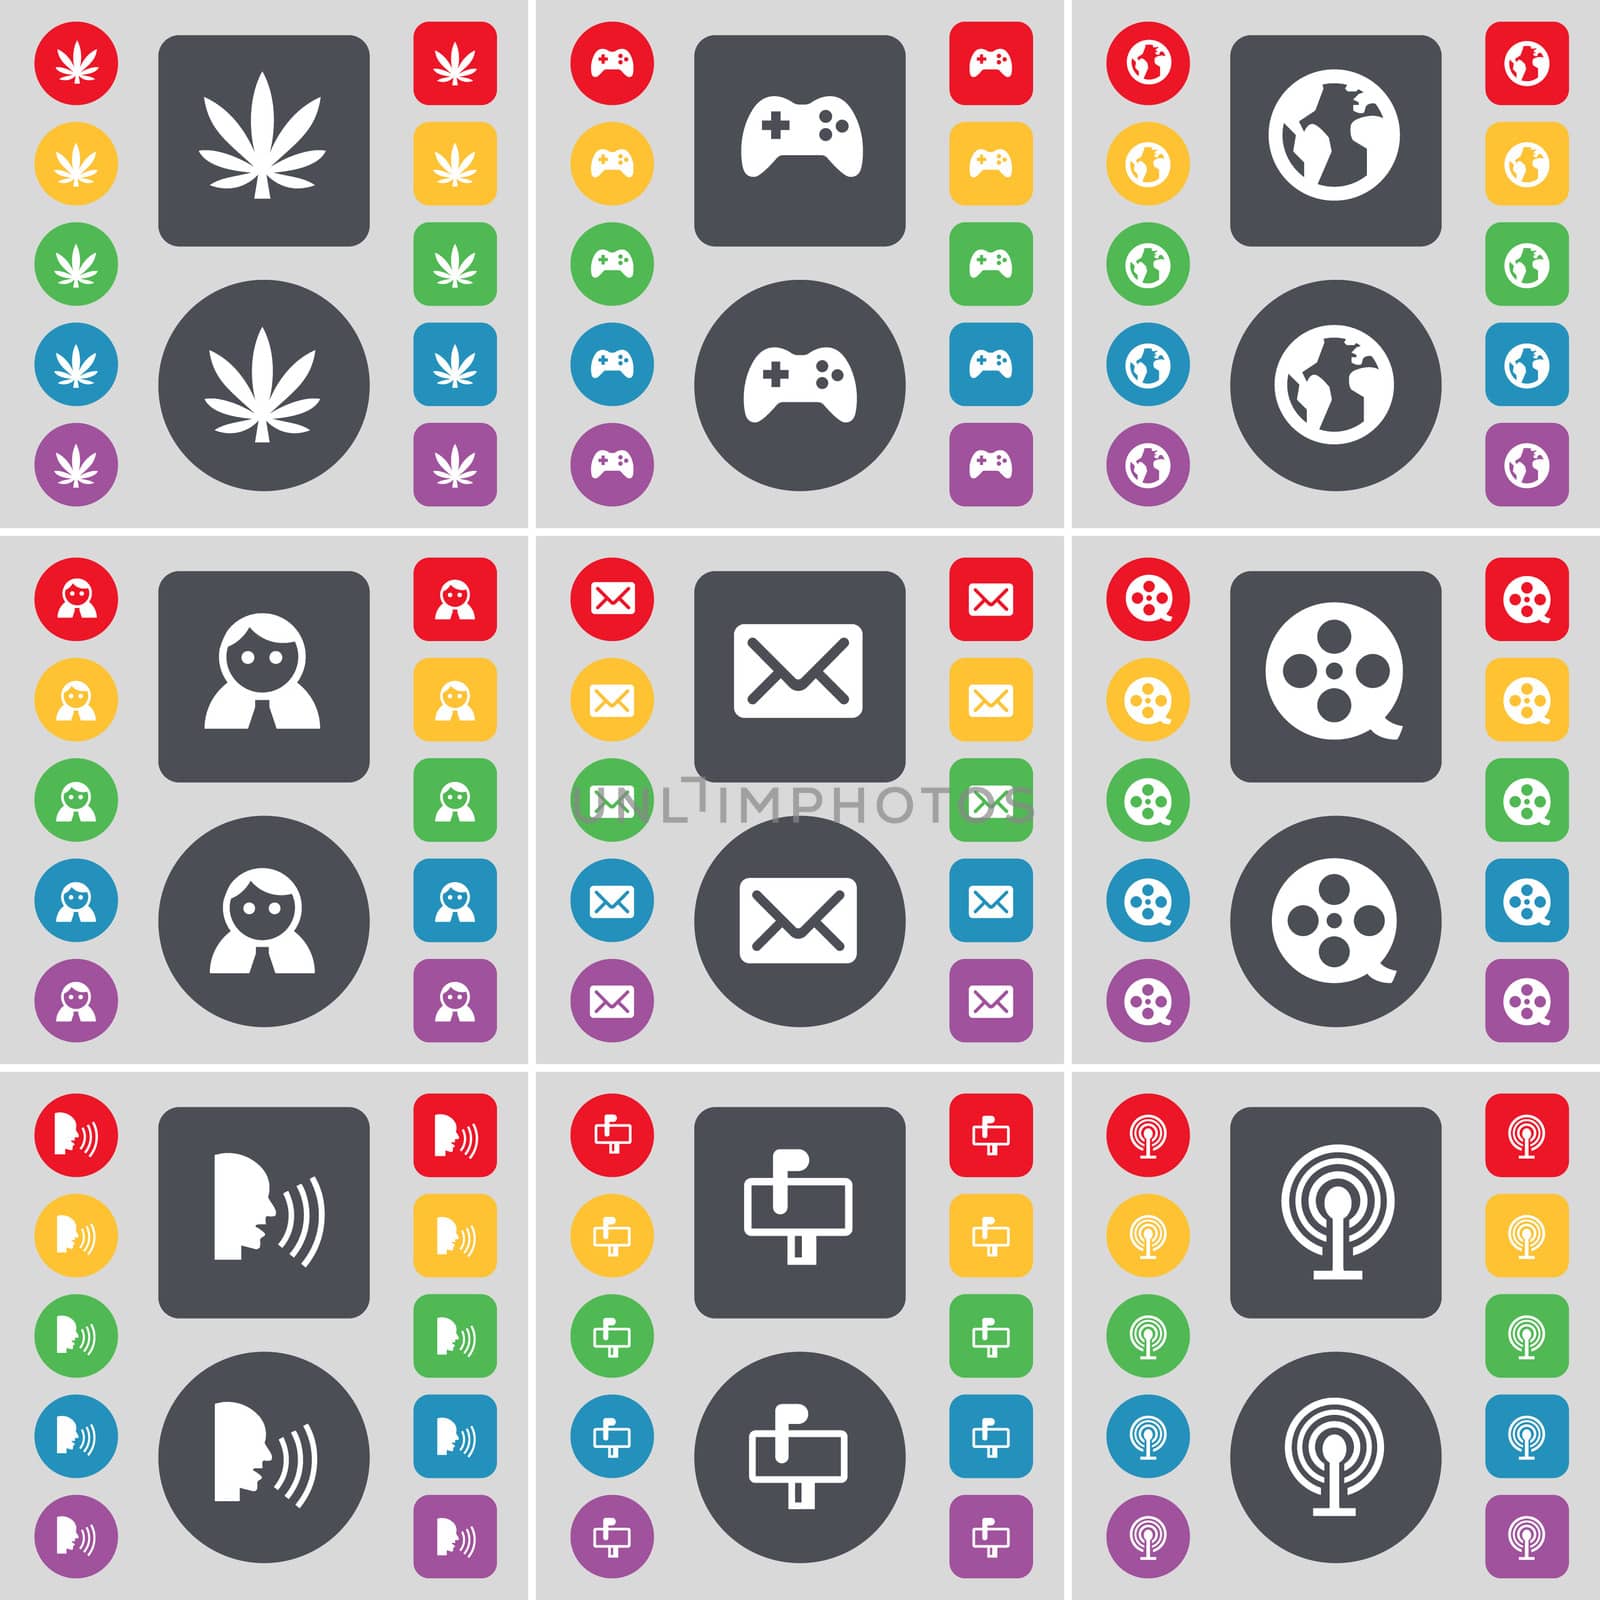 Marijuana, Gamepad, Earth, Avatar, Message, Videotape, Talk, Mailbox, Wi-Fi icon symbol. A large set of flat, colored buttons for your design. illustration